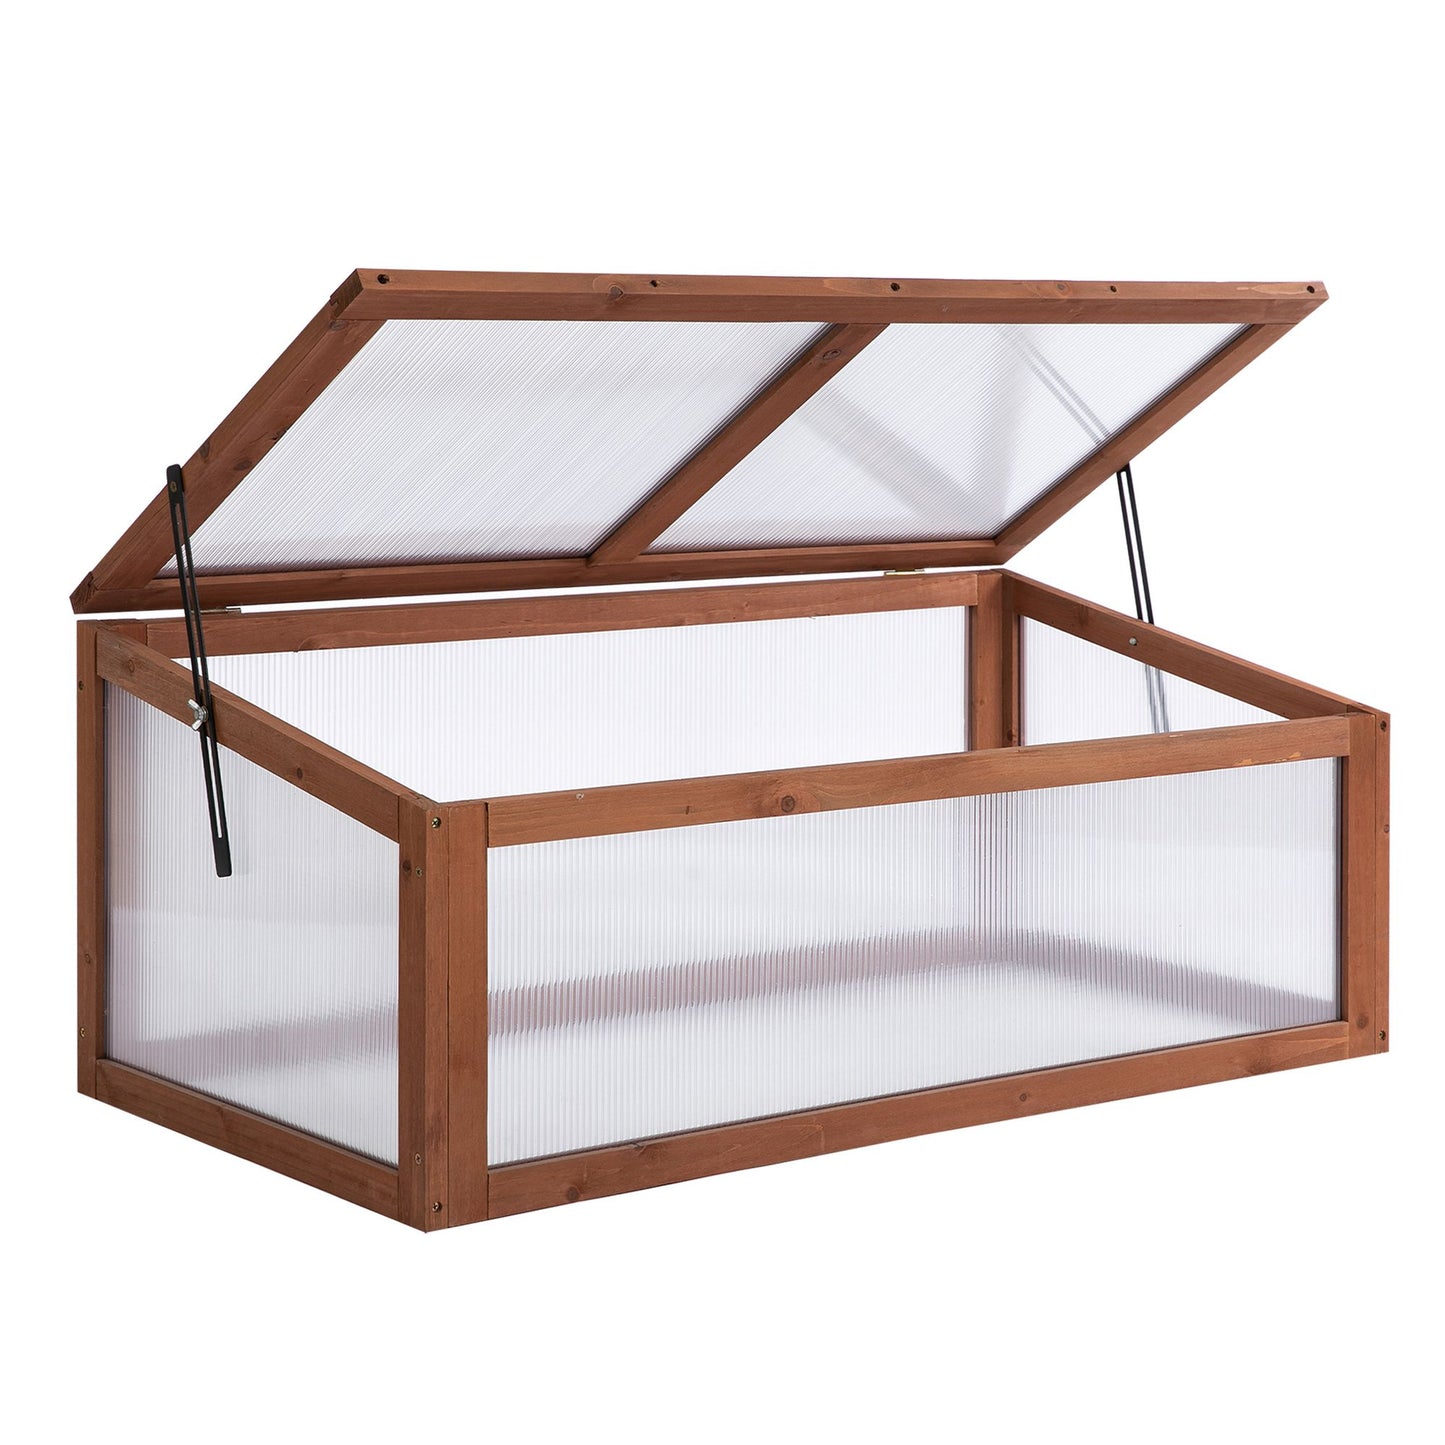 Outsunny Square Wooden Outdoor Greenhouse for Plants with Openable Cover PC Board